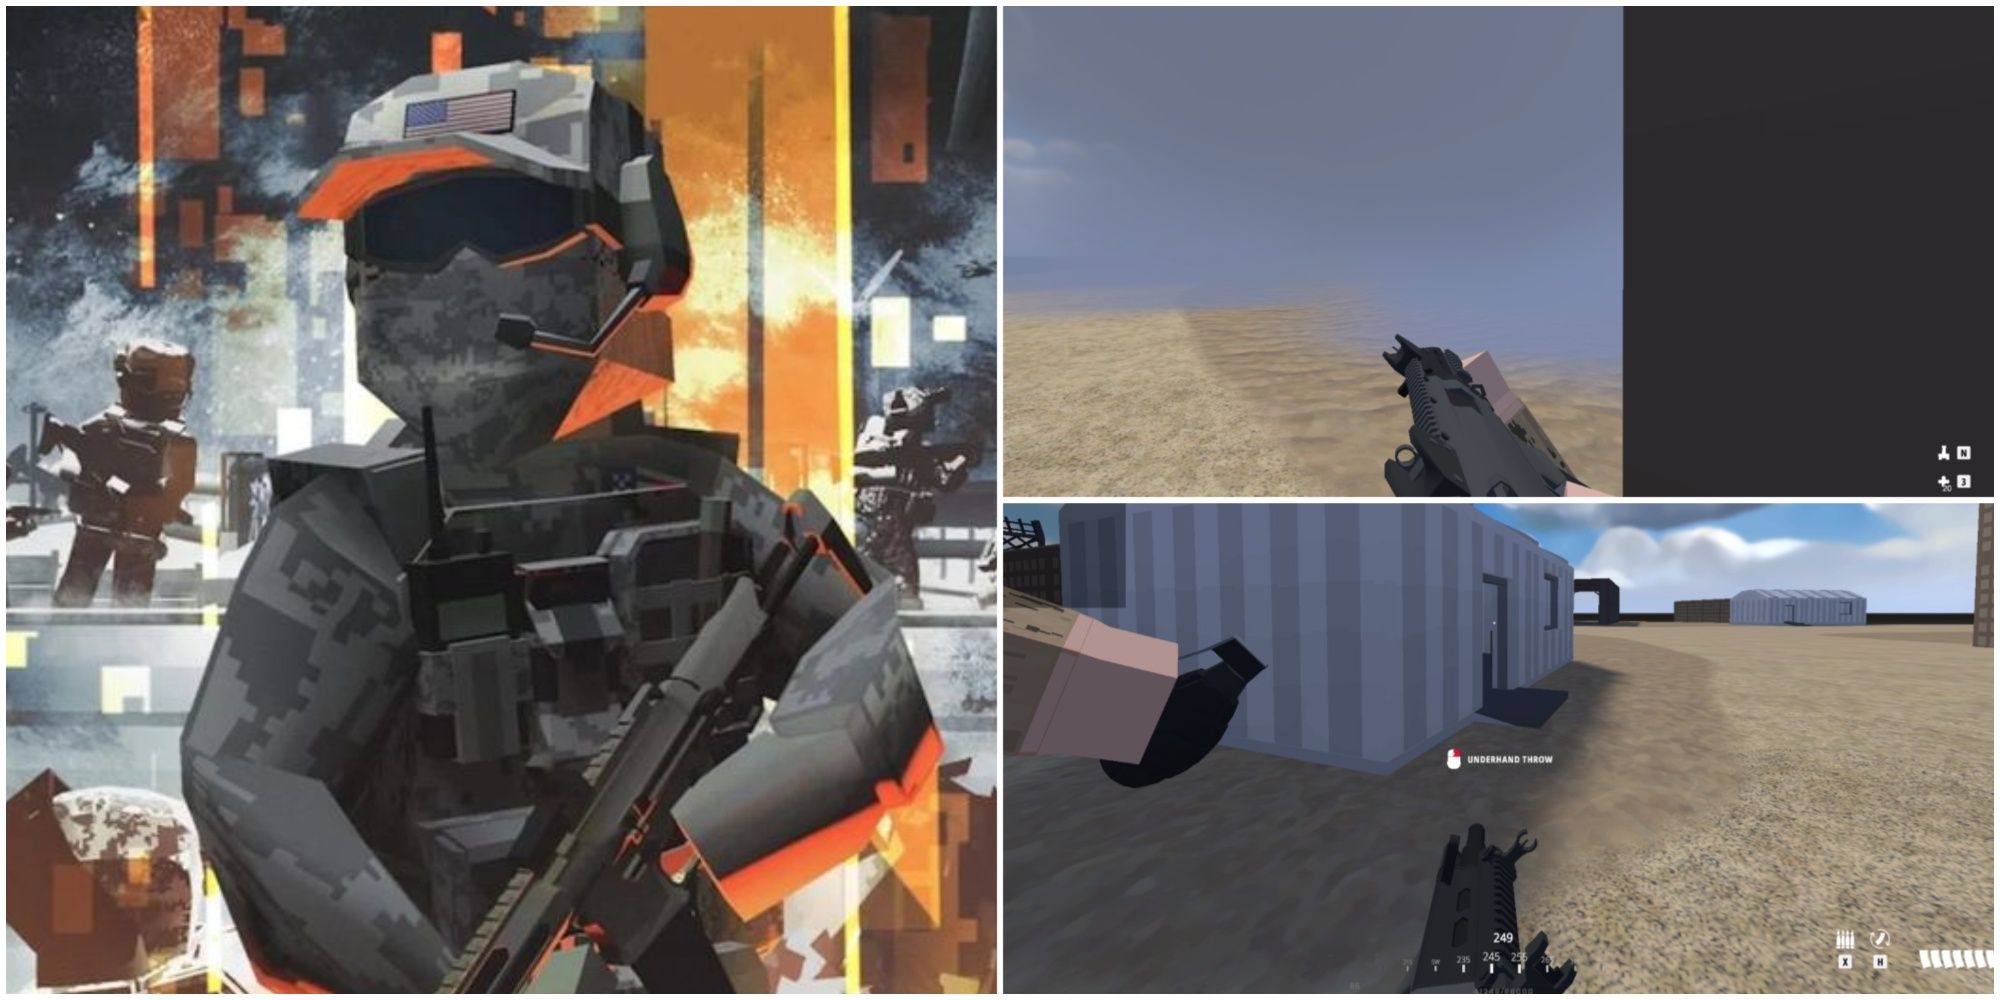 BattleBit Remastered promo splash art (left), SMG leaning a corner into a smoke grenade cloud (top right), player with AUG assault rifle ready to throw a frag grenade (bottom right).